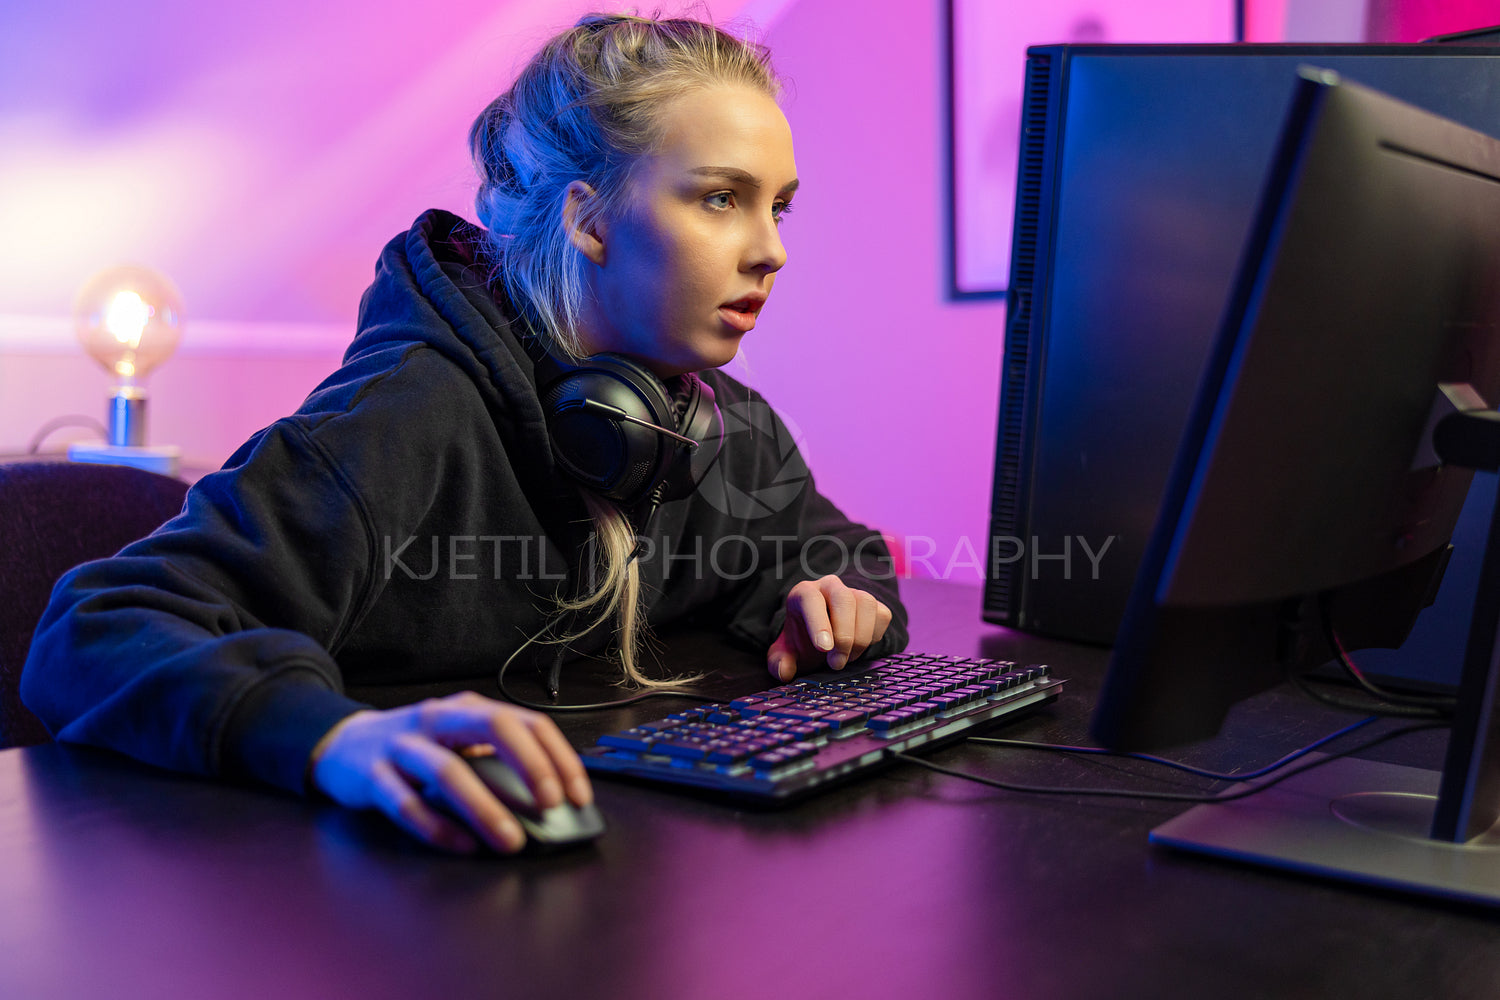 Focused Professional E-sport Gamer Girl in Hoody Playing Online Video Game on PC